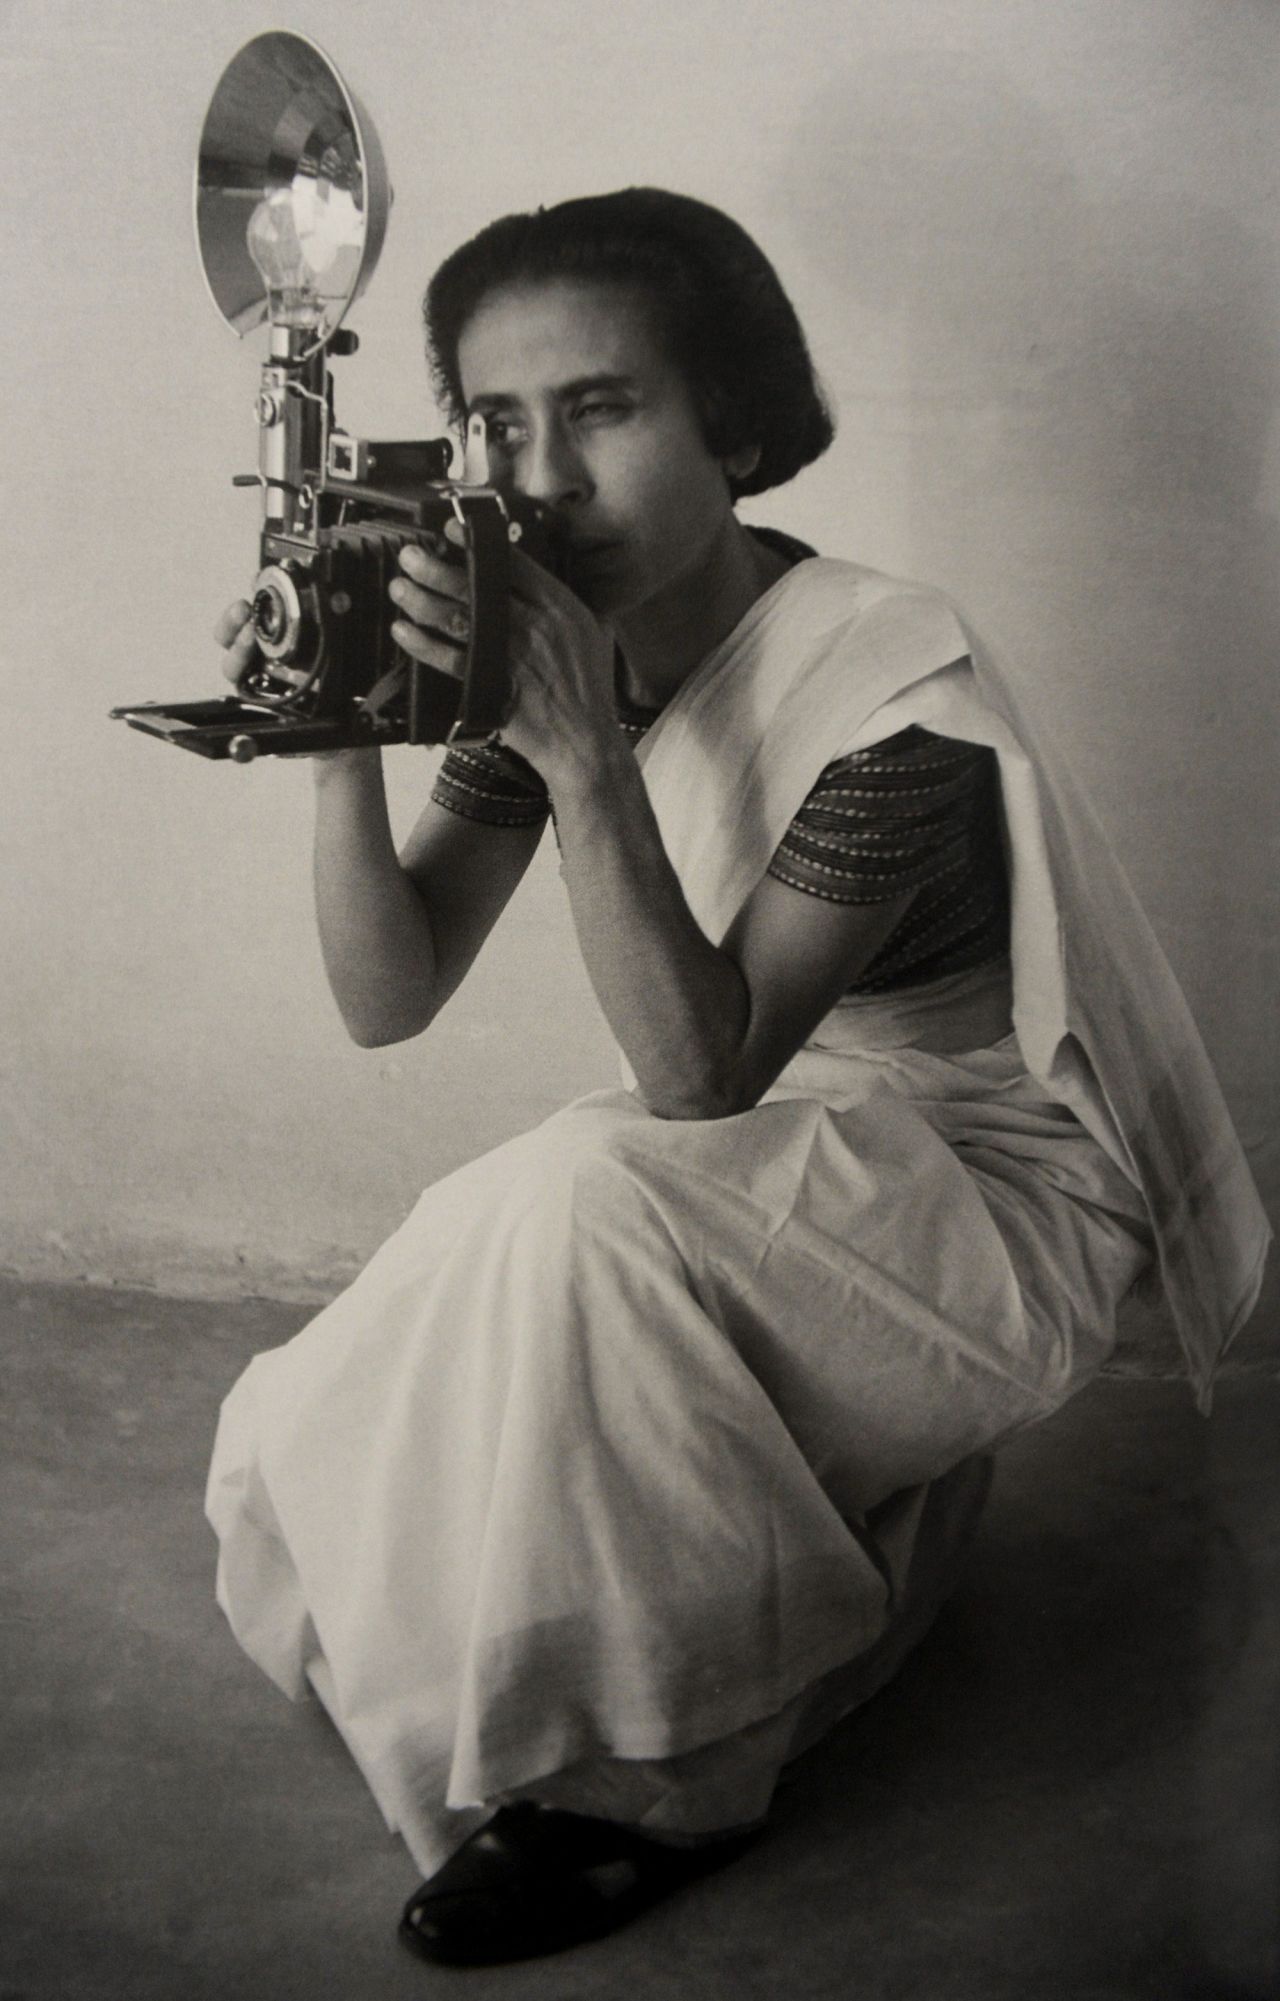 Homai Vyarawalla was India's first woman photojournalist. Her images documented her country, notably its struggle for independence, from the 1930s until the '70s. While working with the British Information Services, she photographed many of her country's leaders as well as visiting dignitaries. Many of her photos were published under a pseudonuym, Dalda 13. Later in life she was awarded Padma Vibhushan, India's second-highest civilian award.